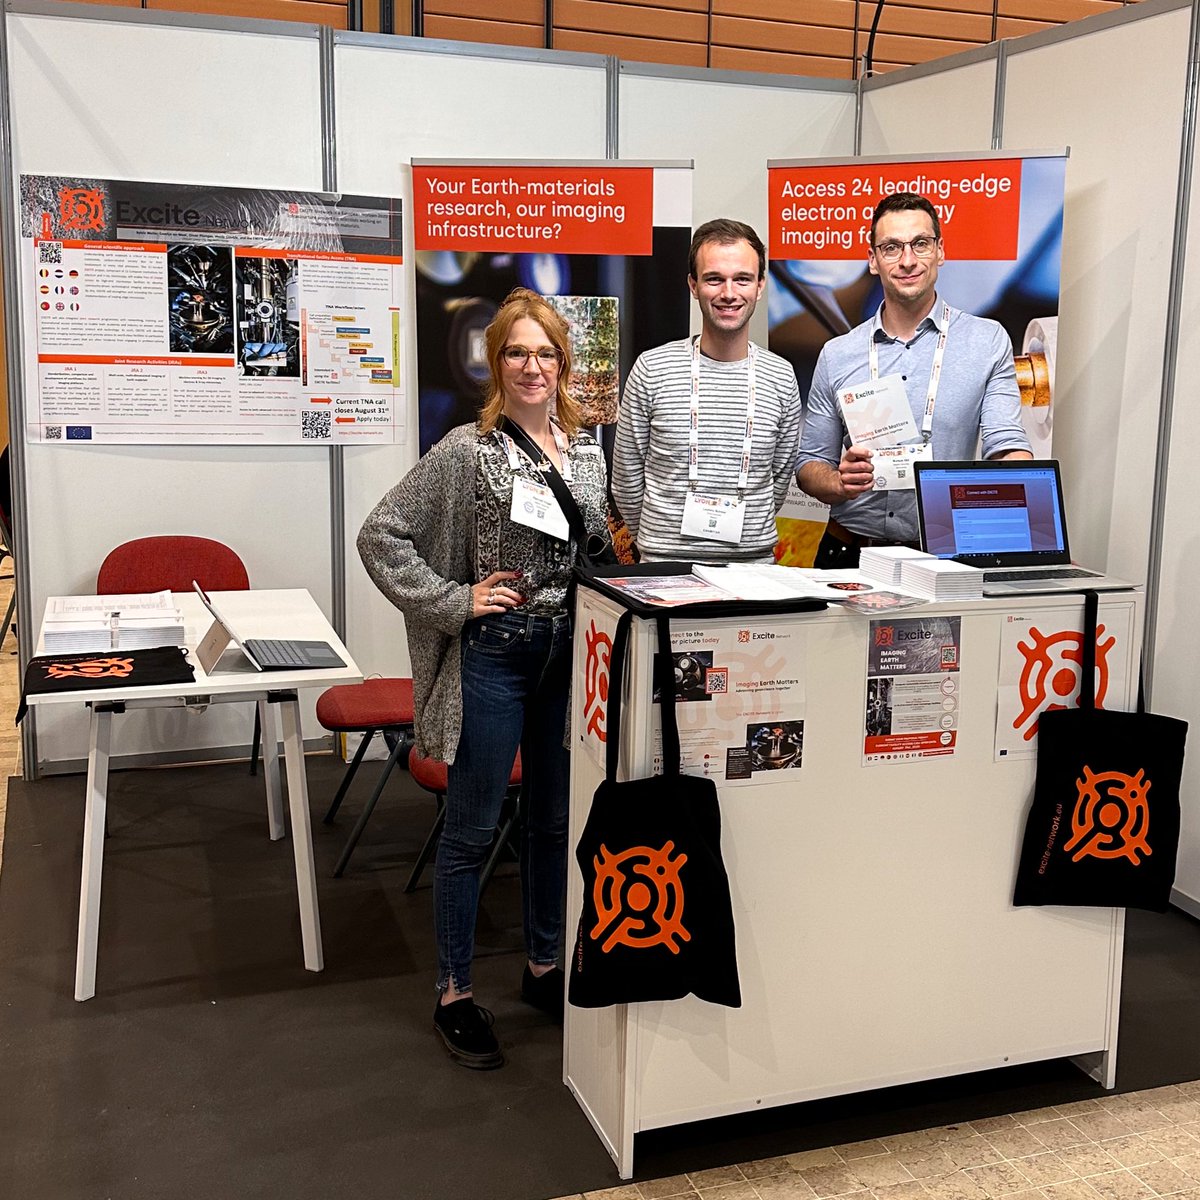 𝐸𝒳𝒞𝐼𝒯𝐸𝒟 about free-of-charge transnational access to leading-edge European microscopy facilities? Us too!! Say hello to the @EXCITE_network team at #Goldschmidt2023 & learn more about our 4th call currently accepting applications until Aug. 31st! @goldschmidt2023